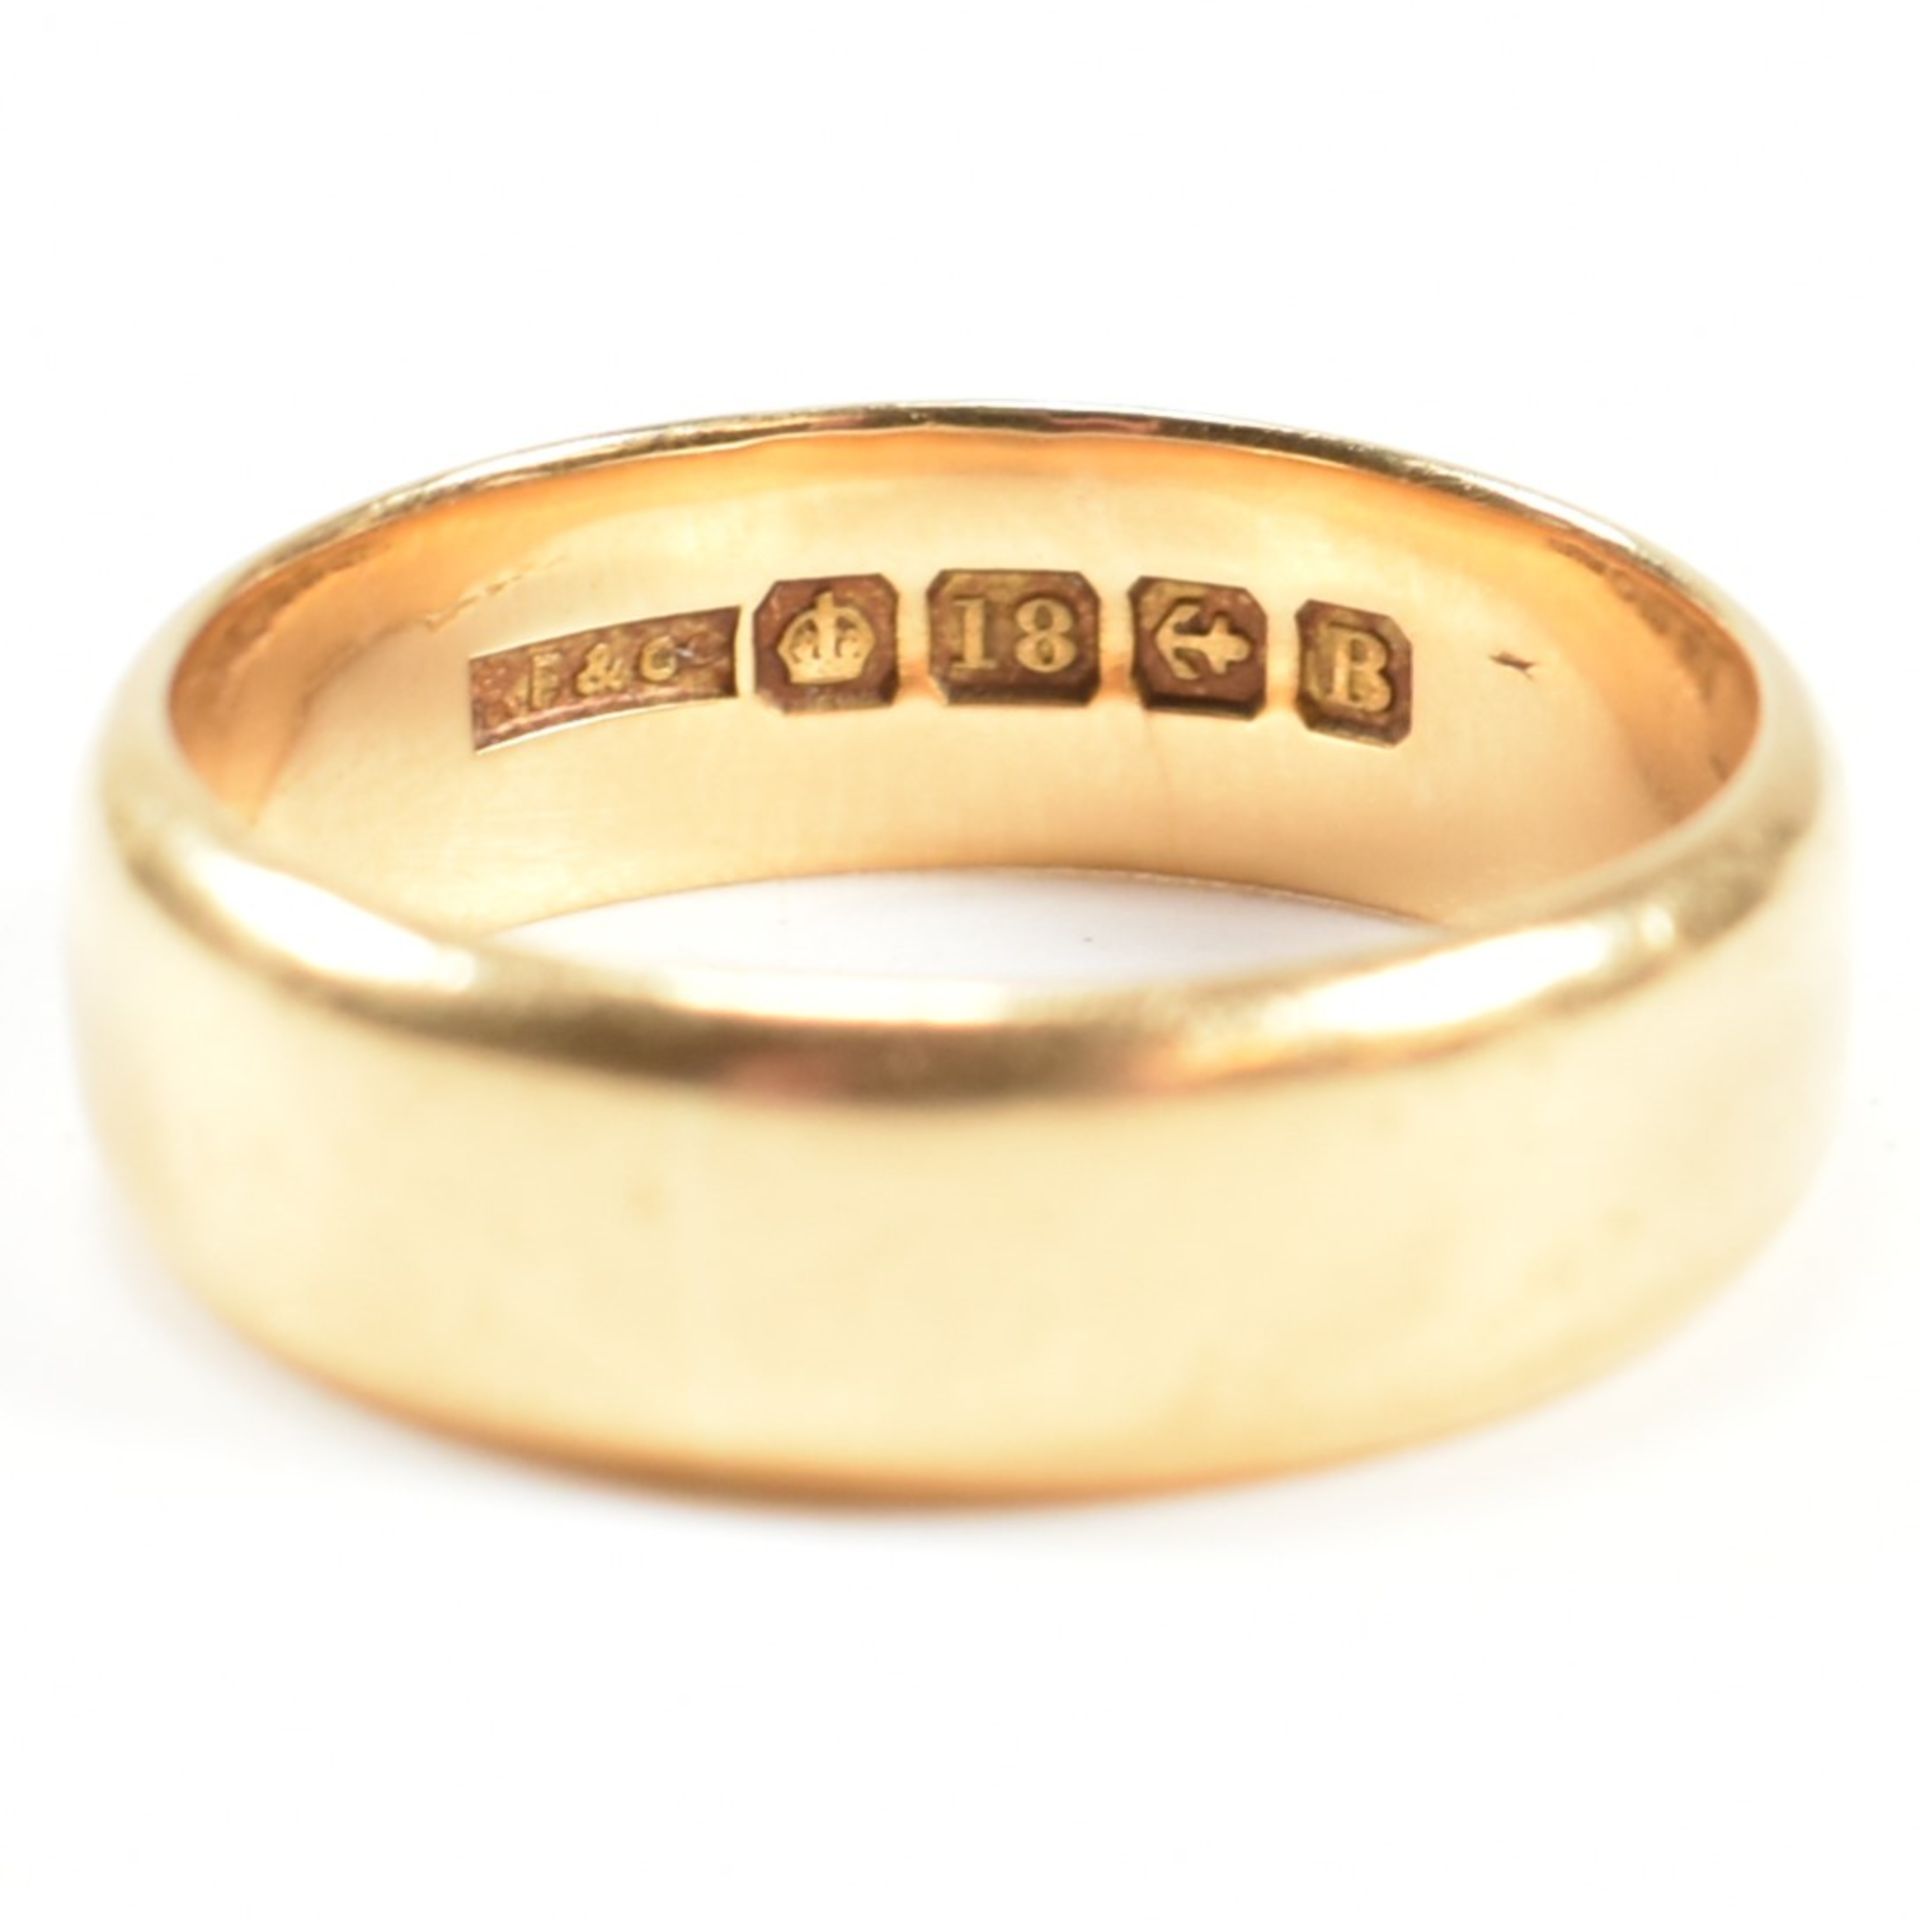 HALLMARKED 18CT GOLD BAND RING - Image 3 of 4